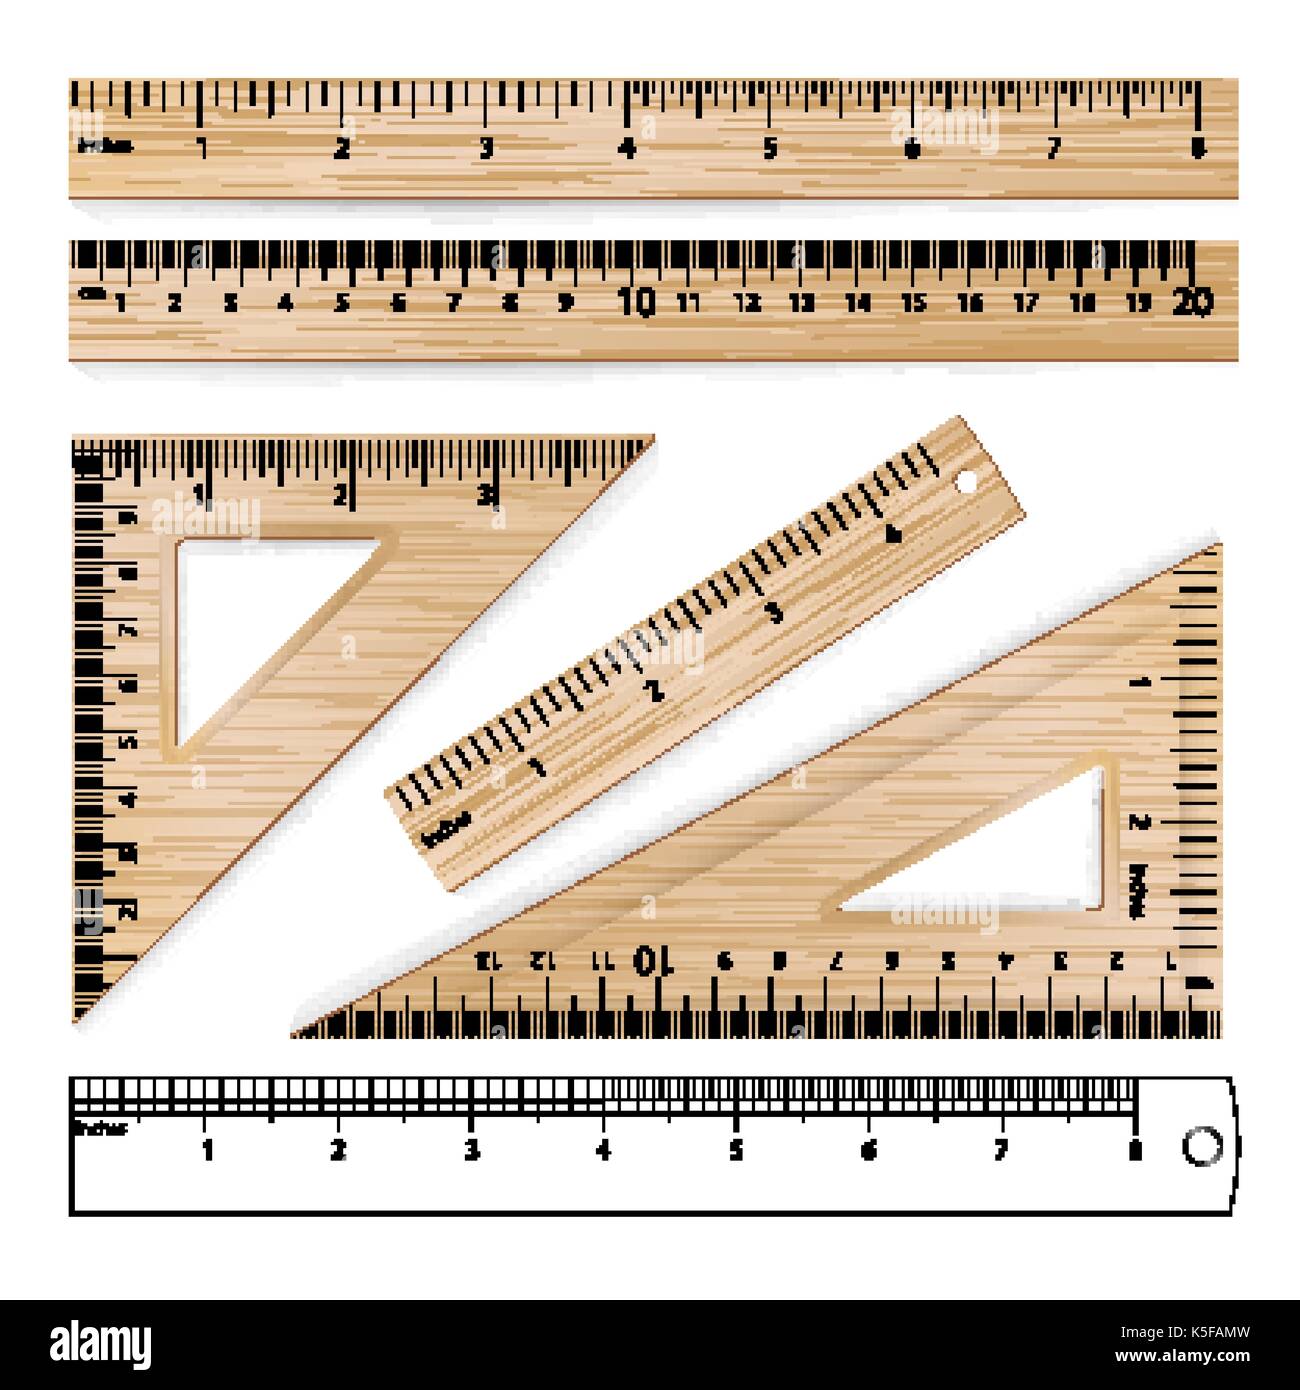 Wooden rulers set metric imperial Royalty Free Vector Image